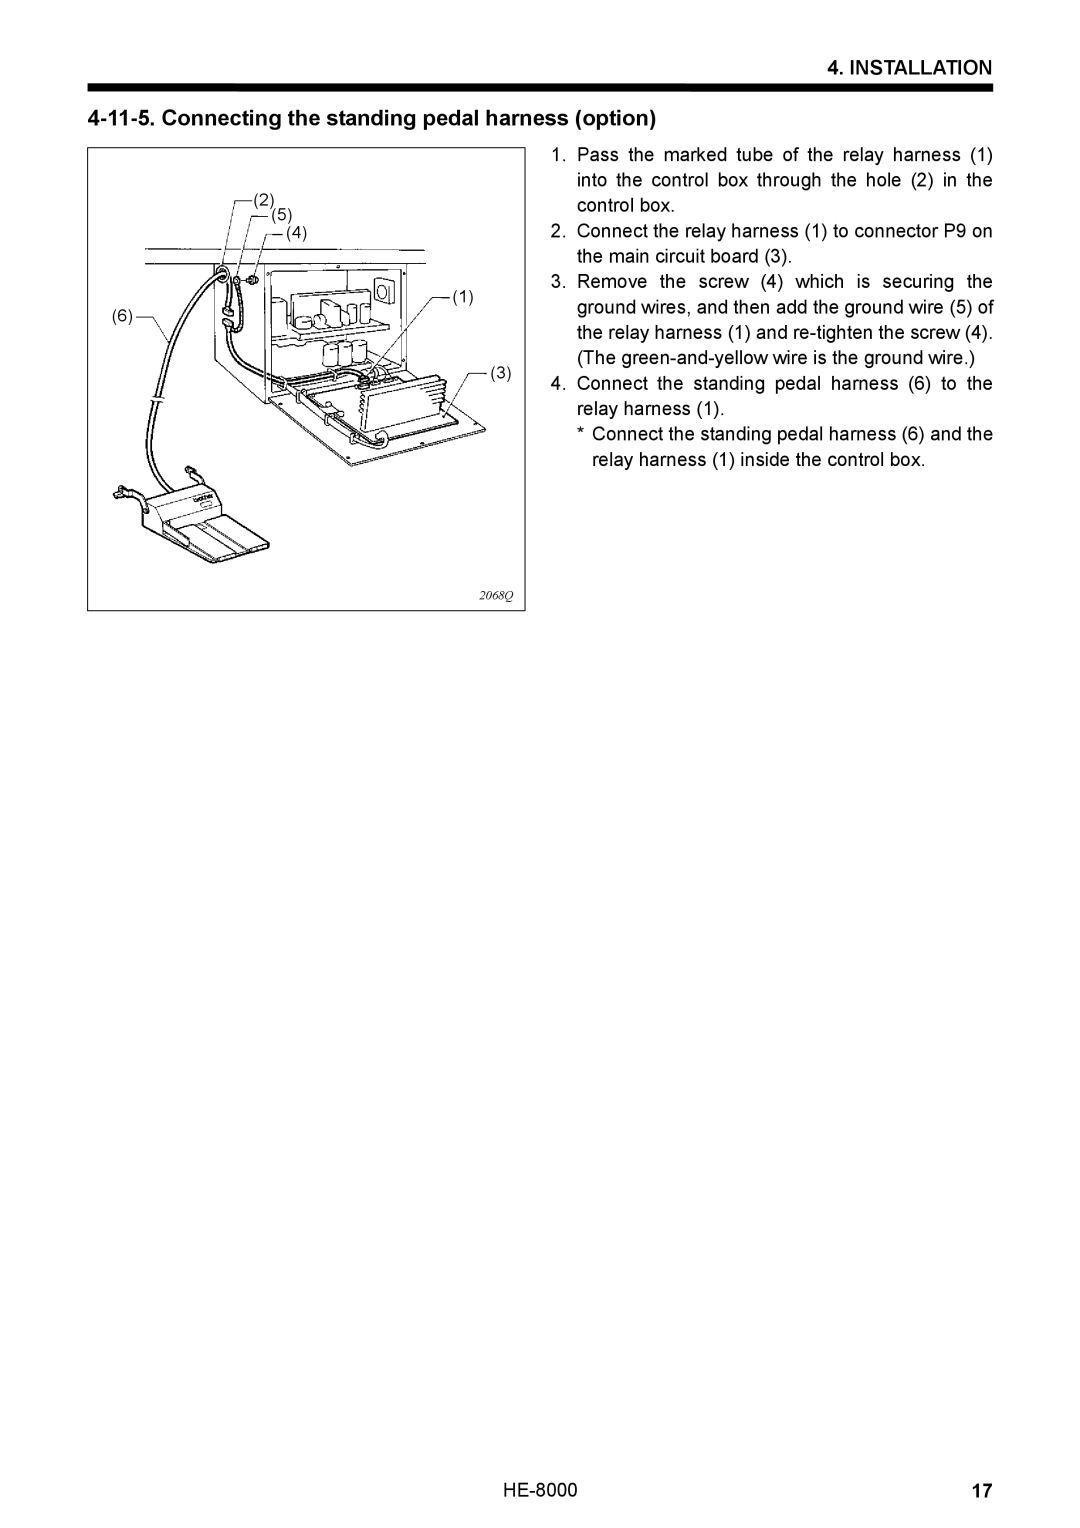 Motorola LH4-B800E, HE-8000 I instruction manual Connecting the standing pedal harness option 